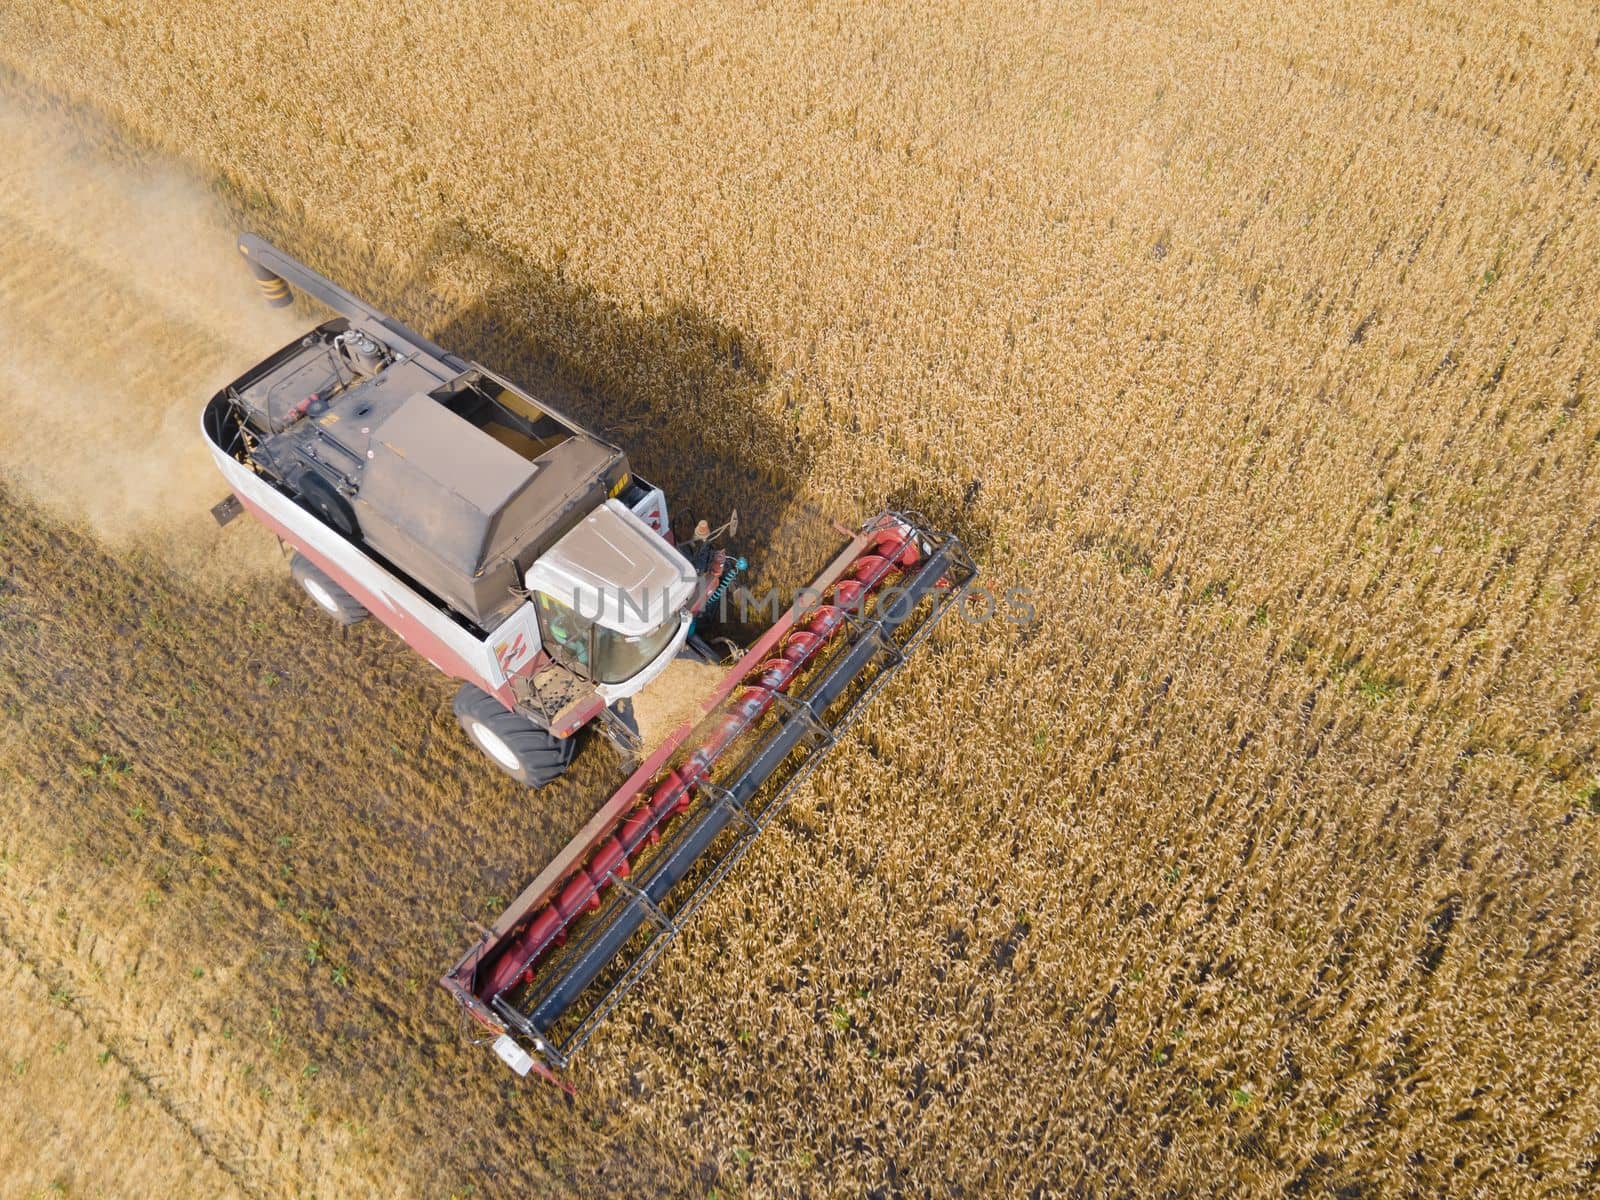 Combines mow wheat in the field.Agro-industry.Combine Harvester Cutting on wheat field.Machine harvest wheat.Harvesting of grain crops.Harvesting wheat,oats and barley in fields,ranches and farmlands